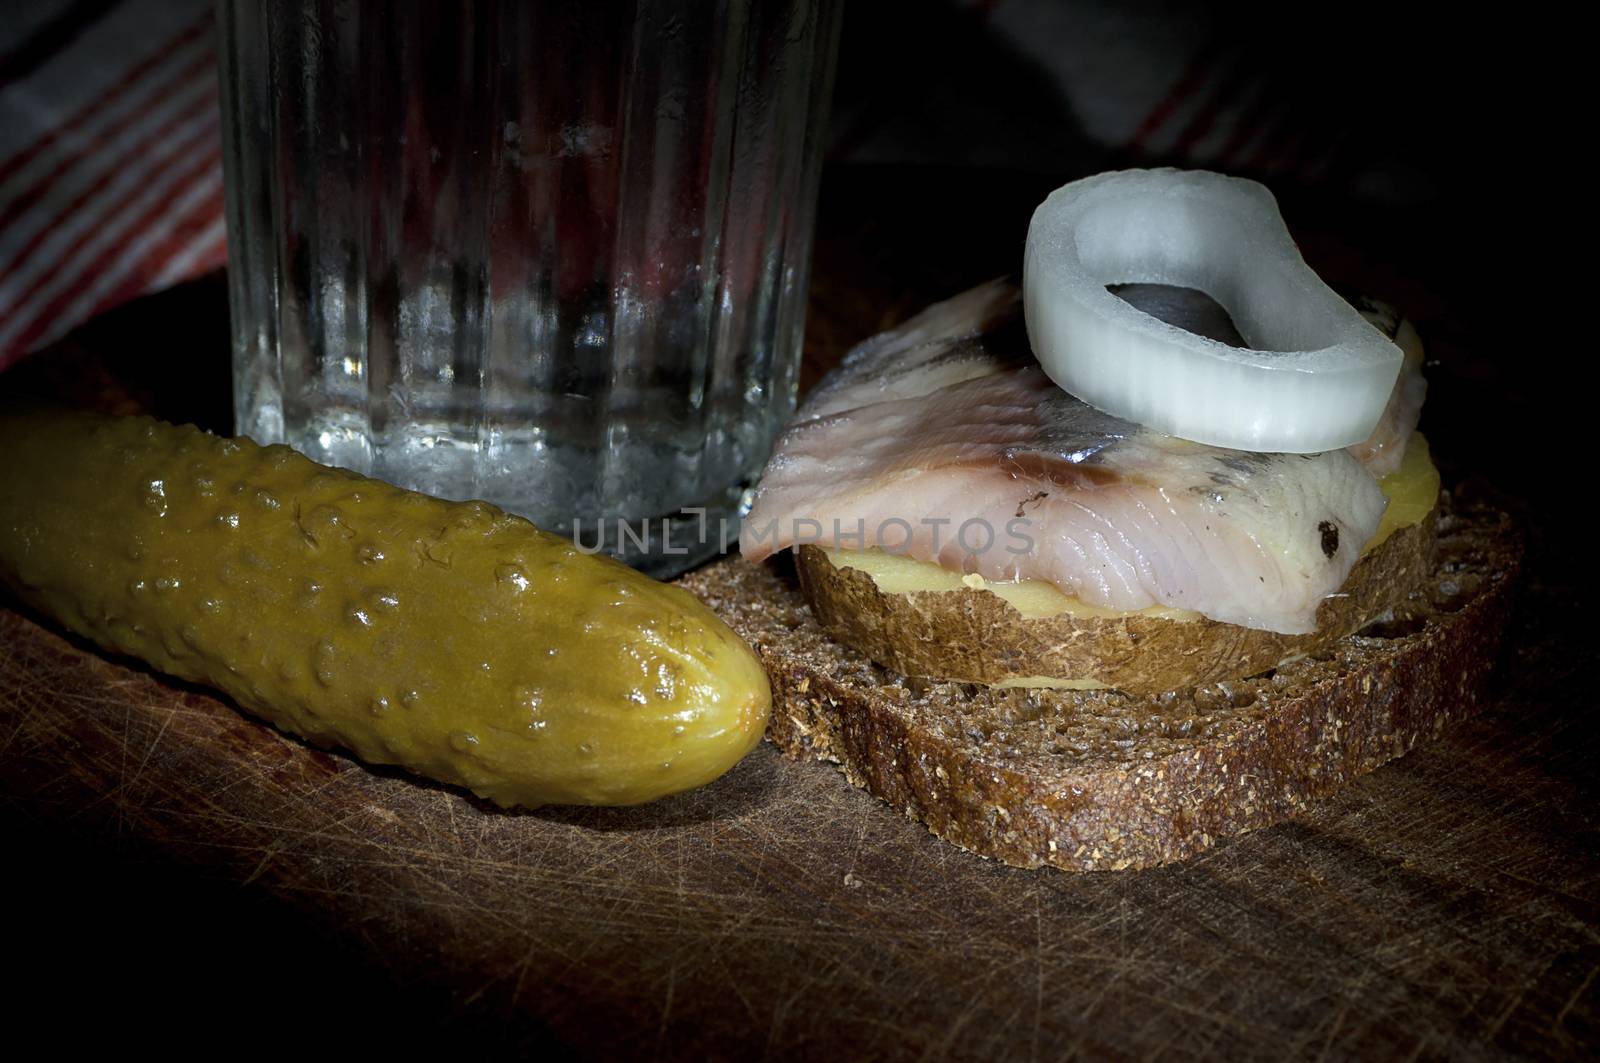 Sandwich with herring and vodka by dred